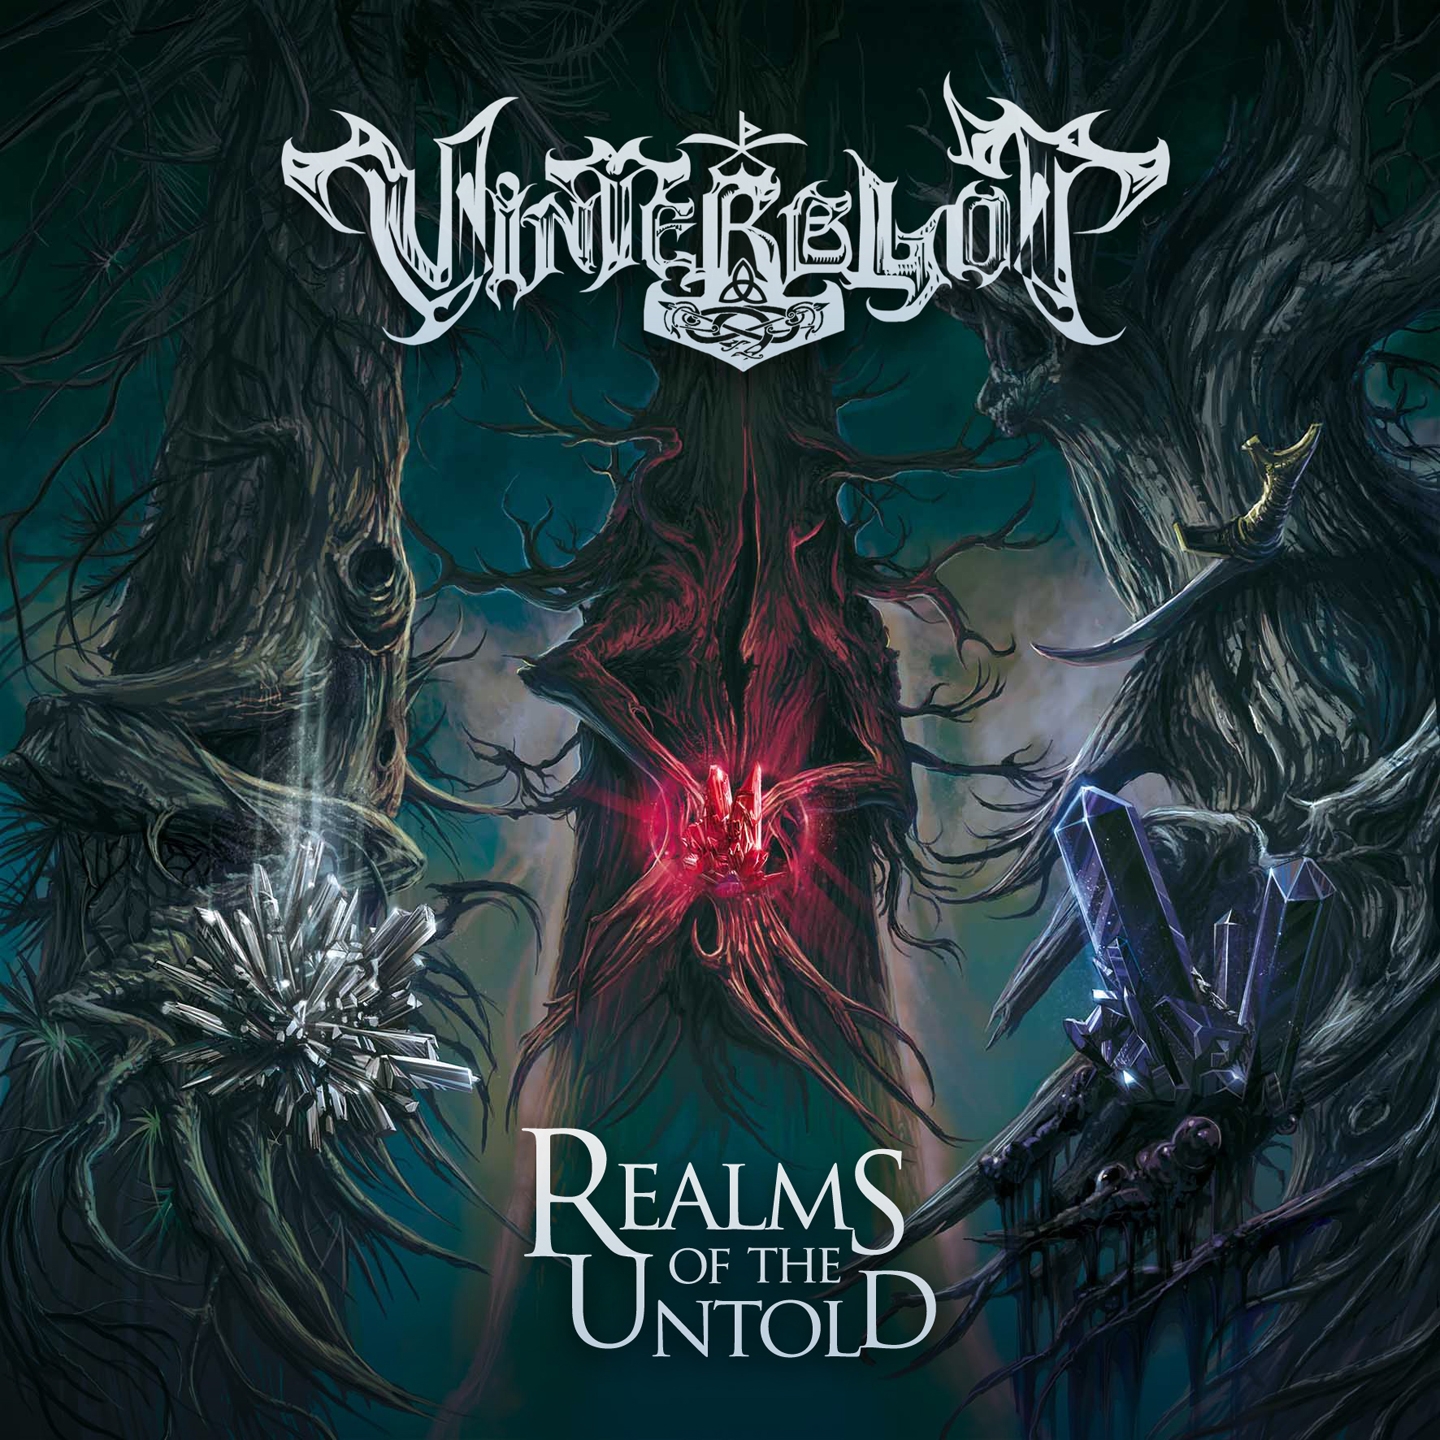 Realms of the Untold